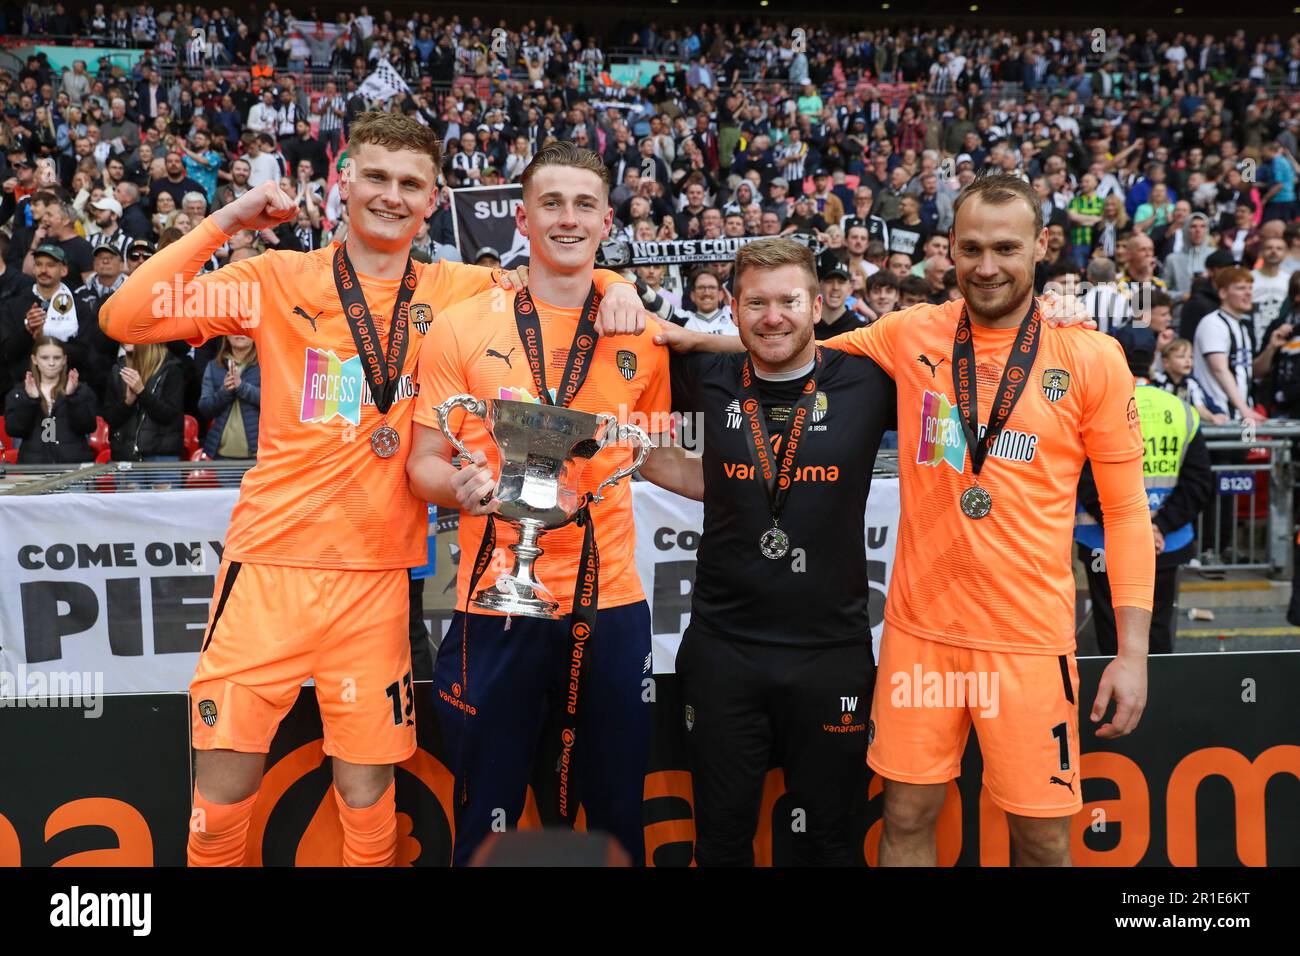 London, UK. 13th May, 2023. London, England, May 13th 2023: Sam Slocombe (1 Notts County), Tiernan Brooks (12 Notts County), Archie Mair (13 Notts County) and member of Notts County's coaching staff poses with the trophy during the Vanarama National League Promotion Final match between Chesterfield and Notts County at Wembley Stadium in London, England. (Alexander Canillas/SPP) Credit: SPP Sport Press Photo. /Alamy Live News Stock Photo